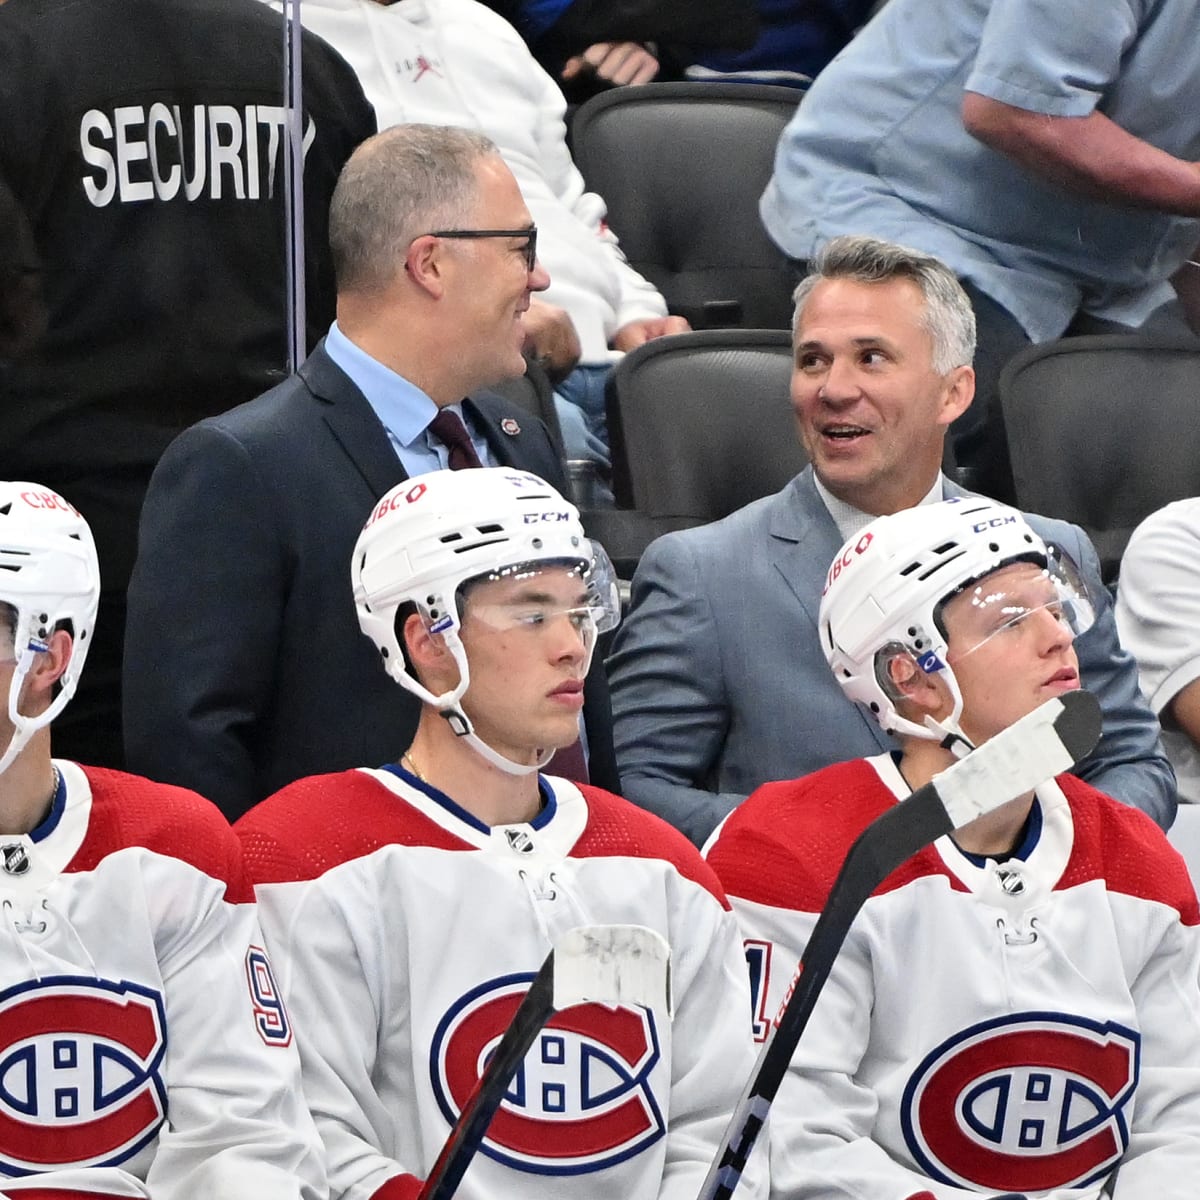 Montreal Canadiens: Arber Xhekaj makes team but is not listed on roster